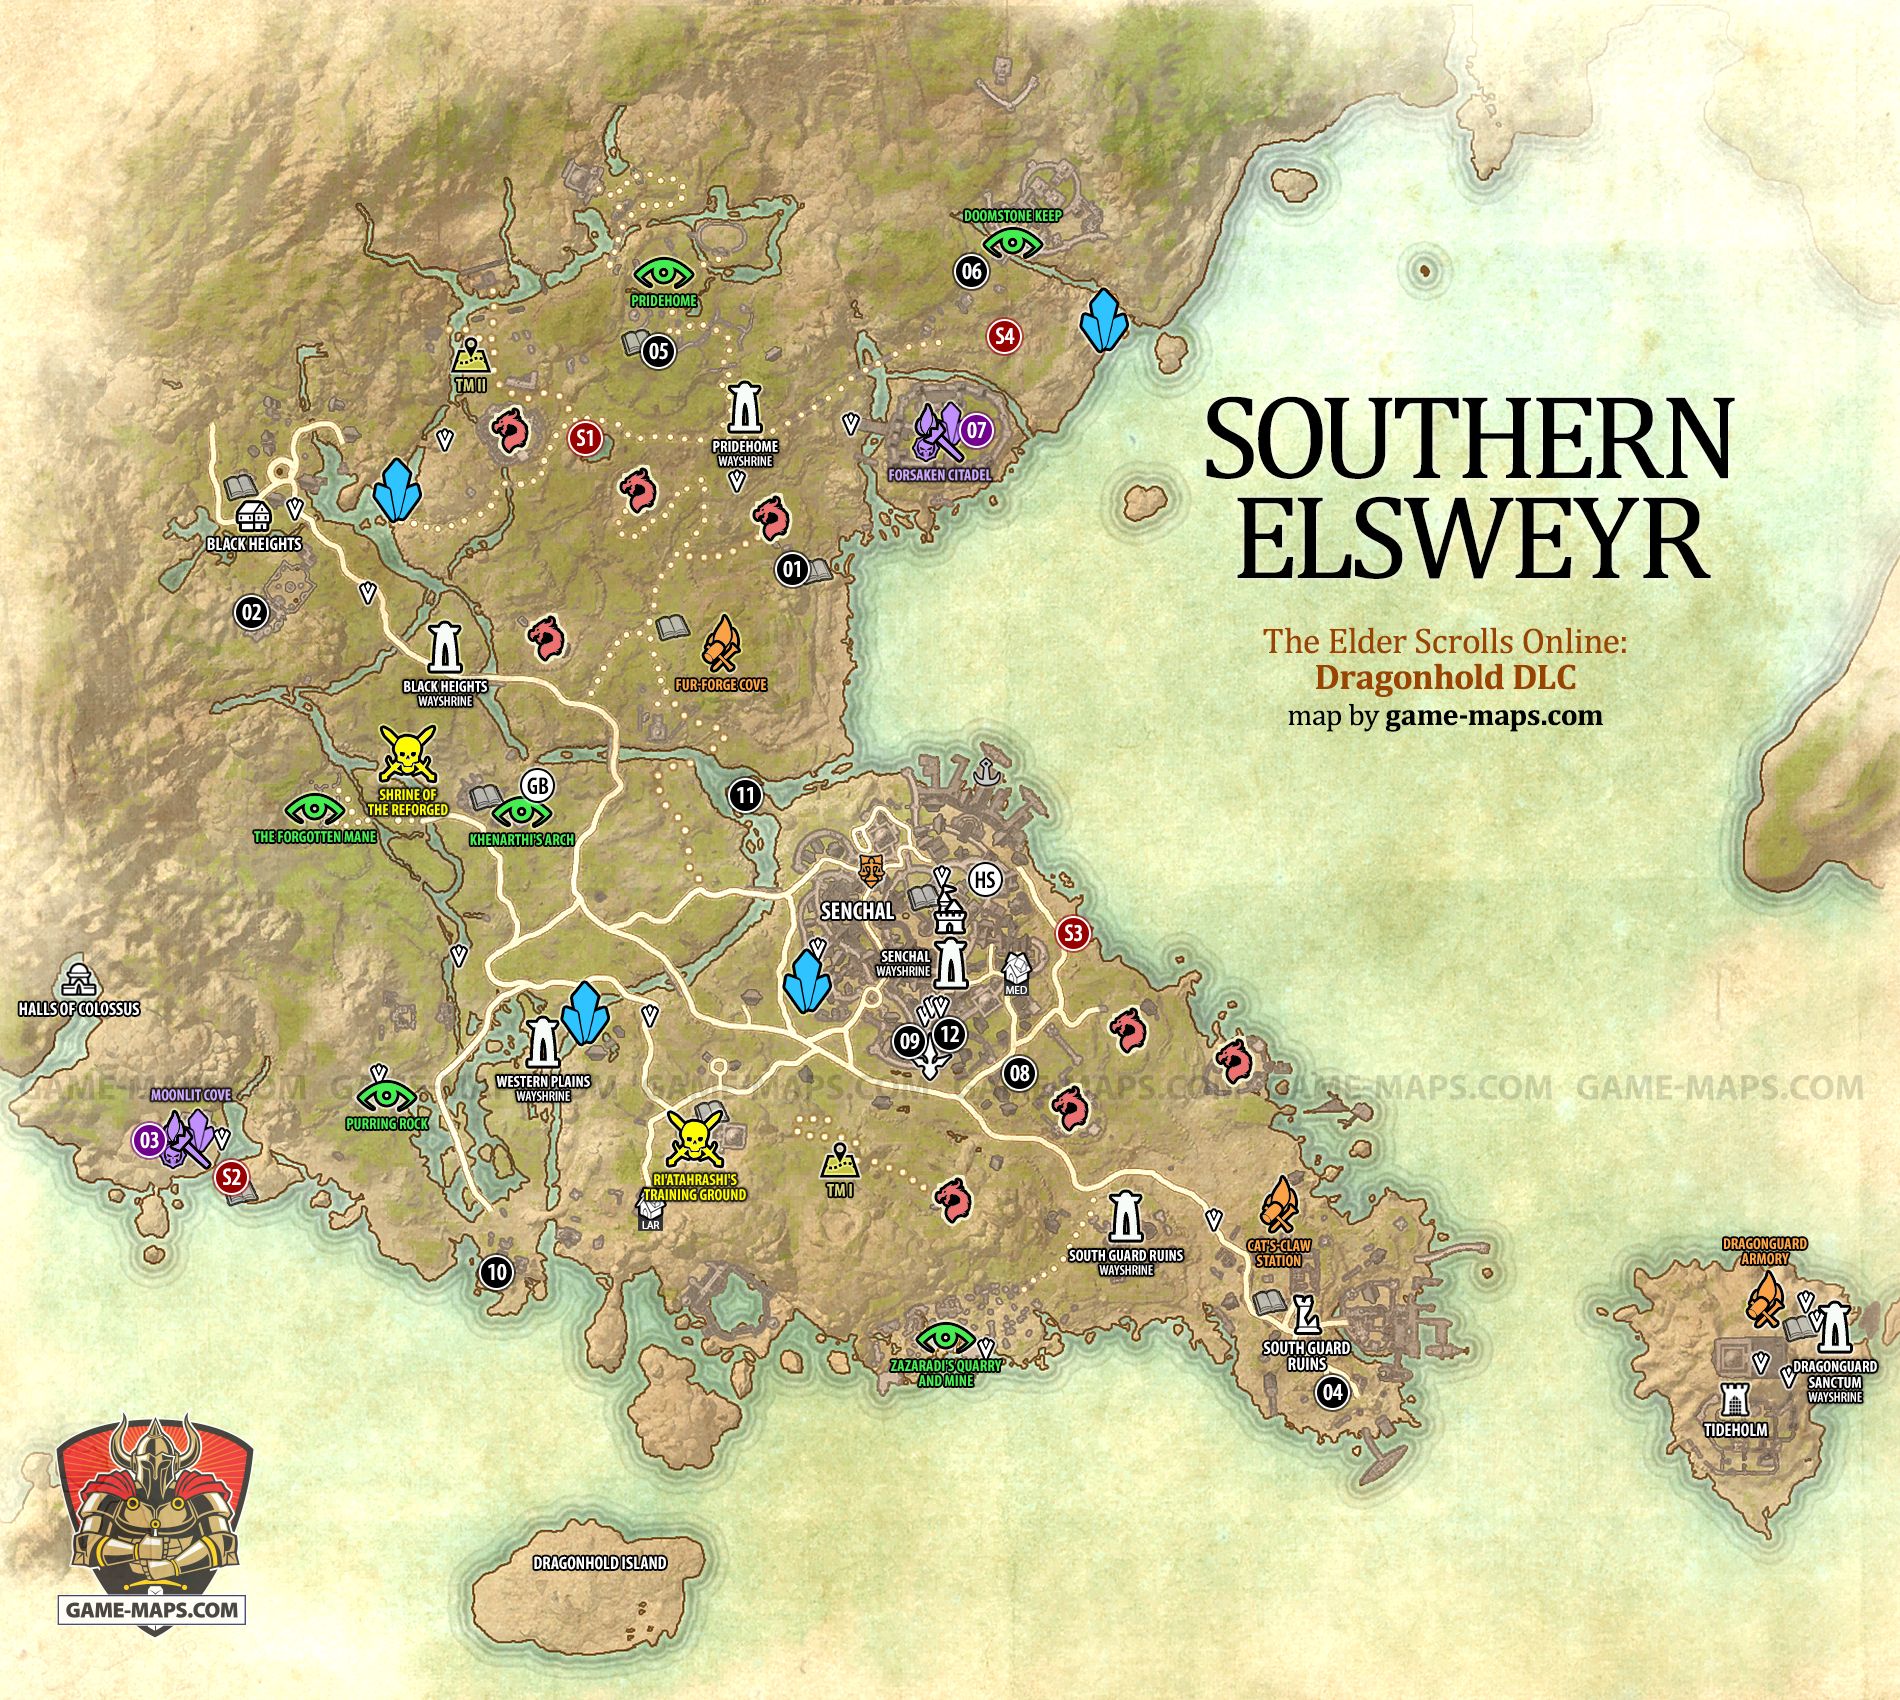 Southern Elsweyr Map for The Elder Scrolls Online: Dragonhold DLC, The Season of the Dragon 2019 Adventure (ESO).